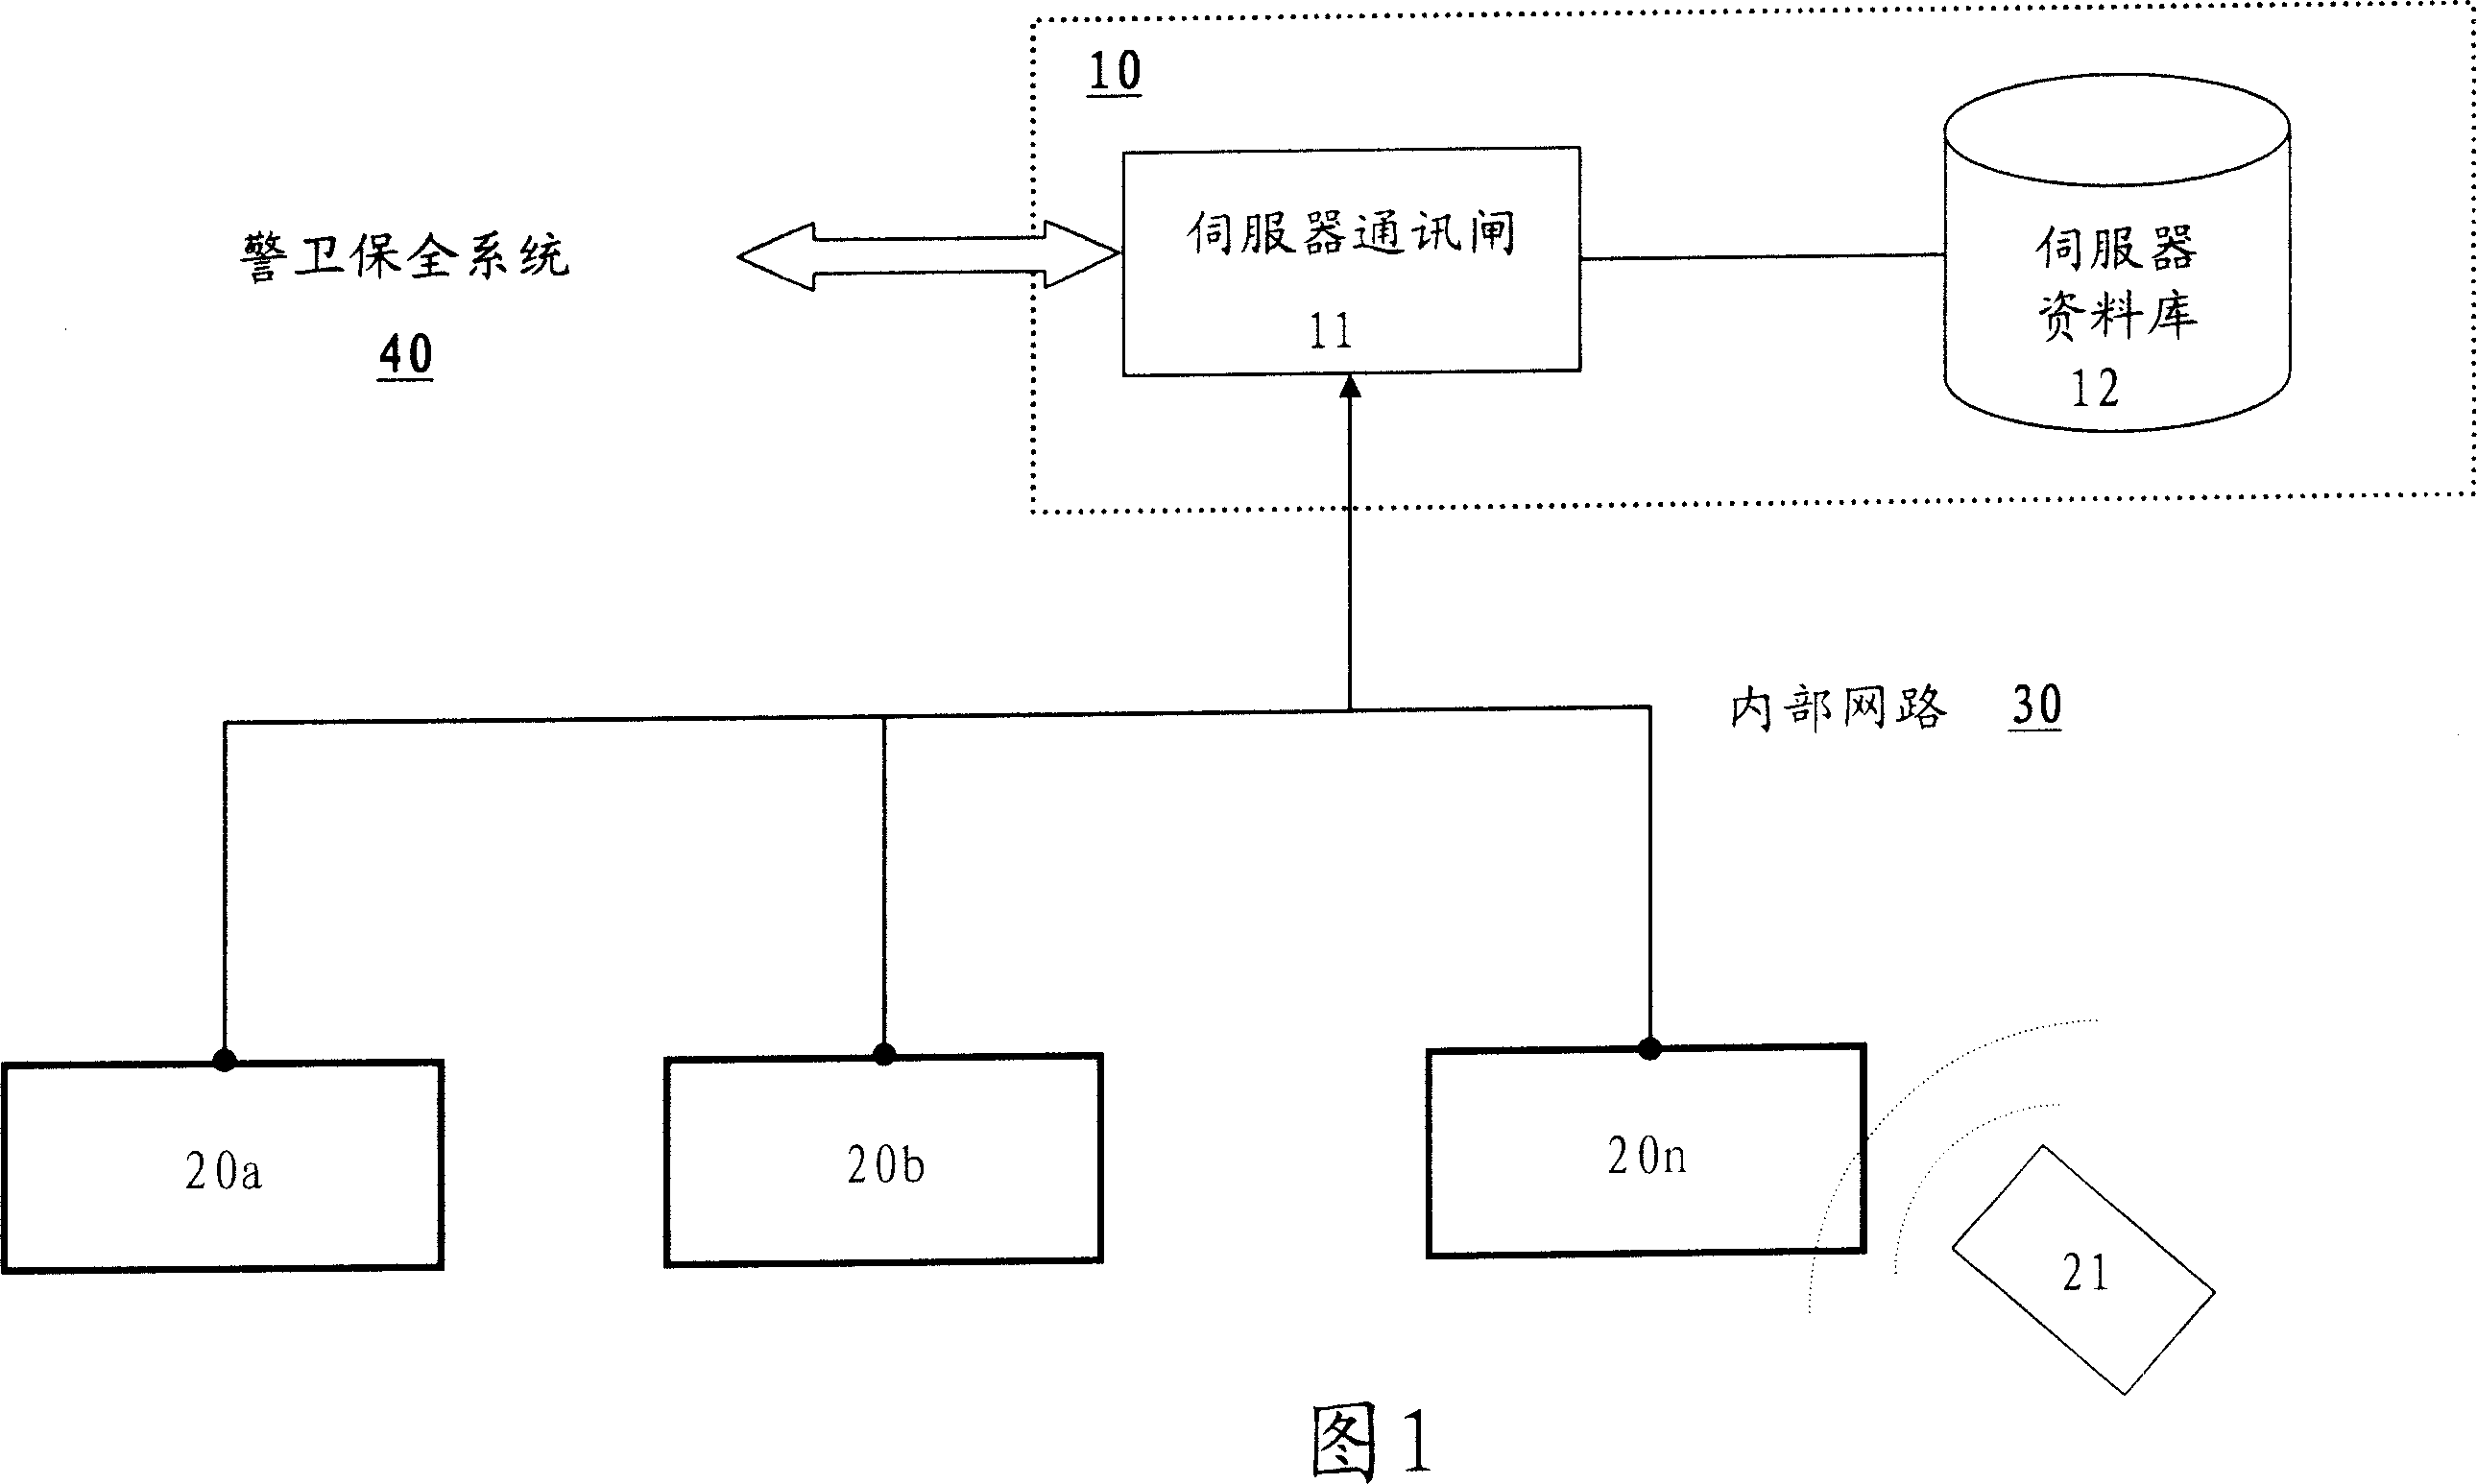 Radio frequency identification system and management method using radio frequency identification system